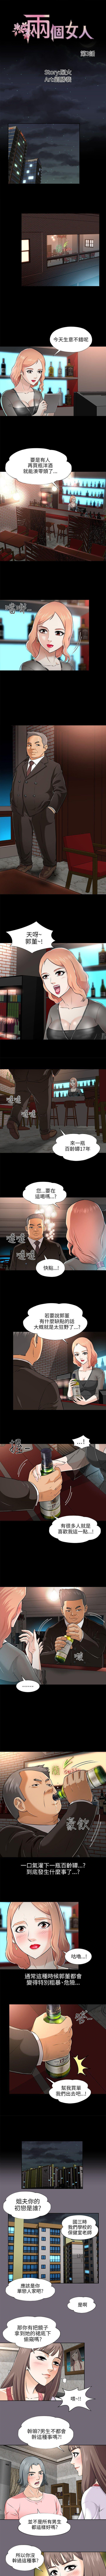 Glam 兩個女人 1-23 Fuck - Page 13